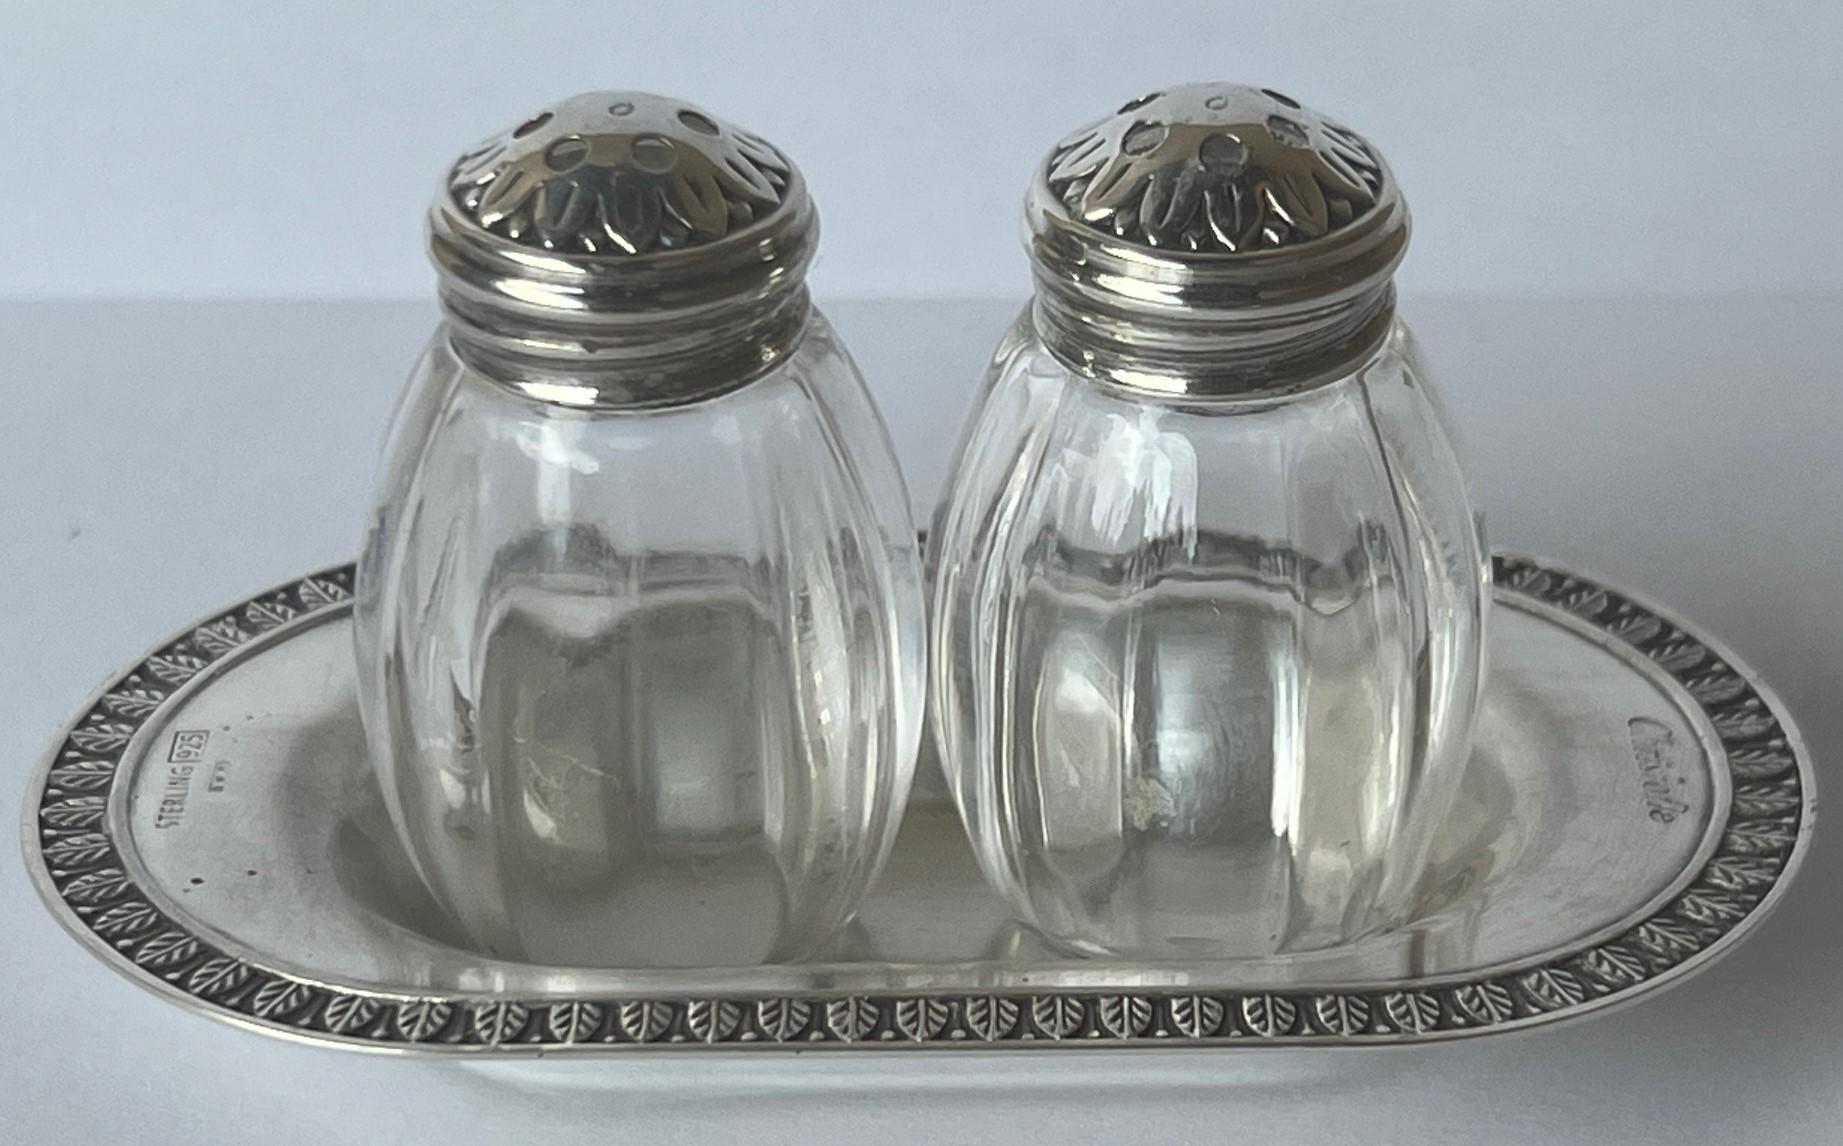 Small sterling silver salt and pepper shakers and tray, made in France by Christofle in the Malmaison pattern.

Malmaison, an Empire style is named after the castle which was a favorite vacation spot for Emperor Napoleon Bonaparte and Empress